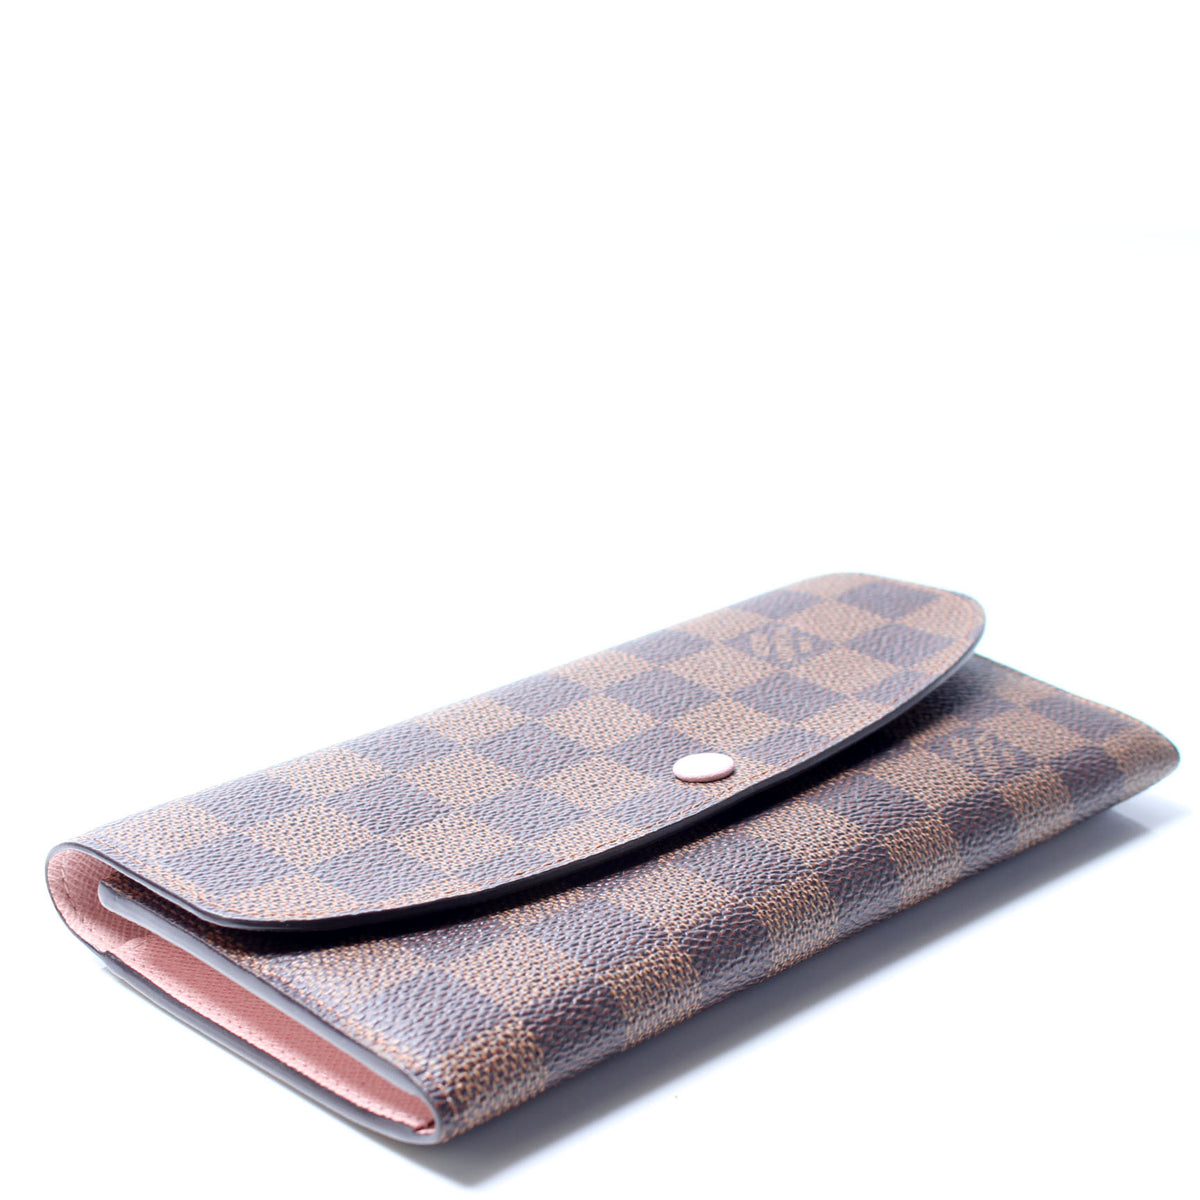 Emilie Wallet Damier Ebene Canvas - Wallets and Small Leather Goods